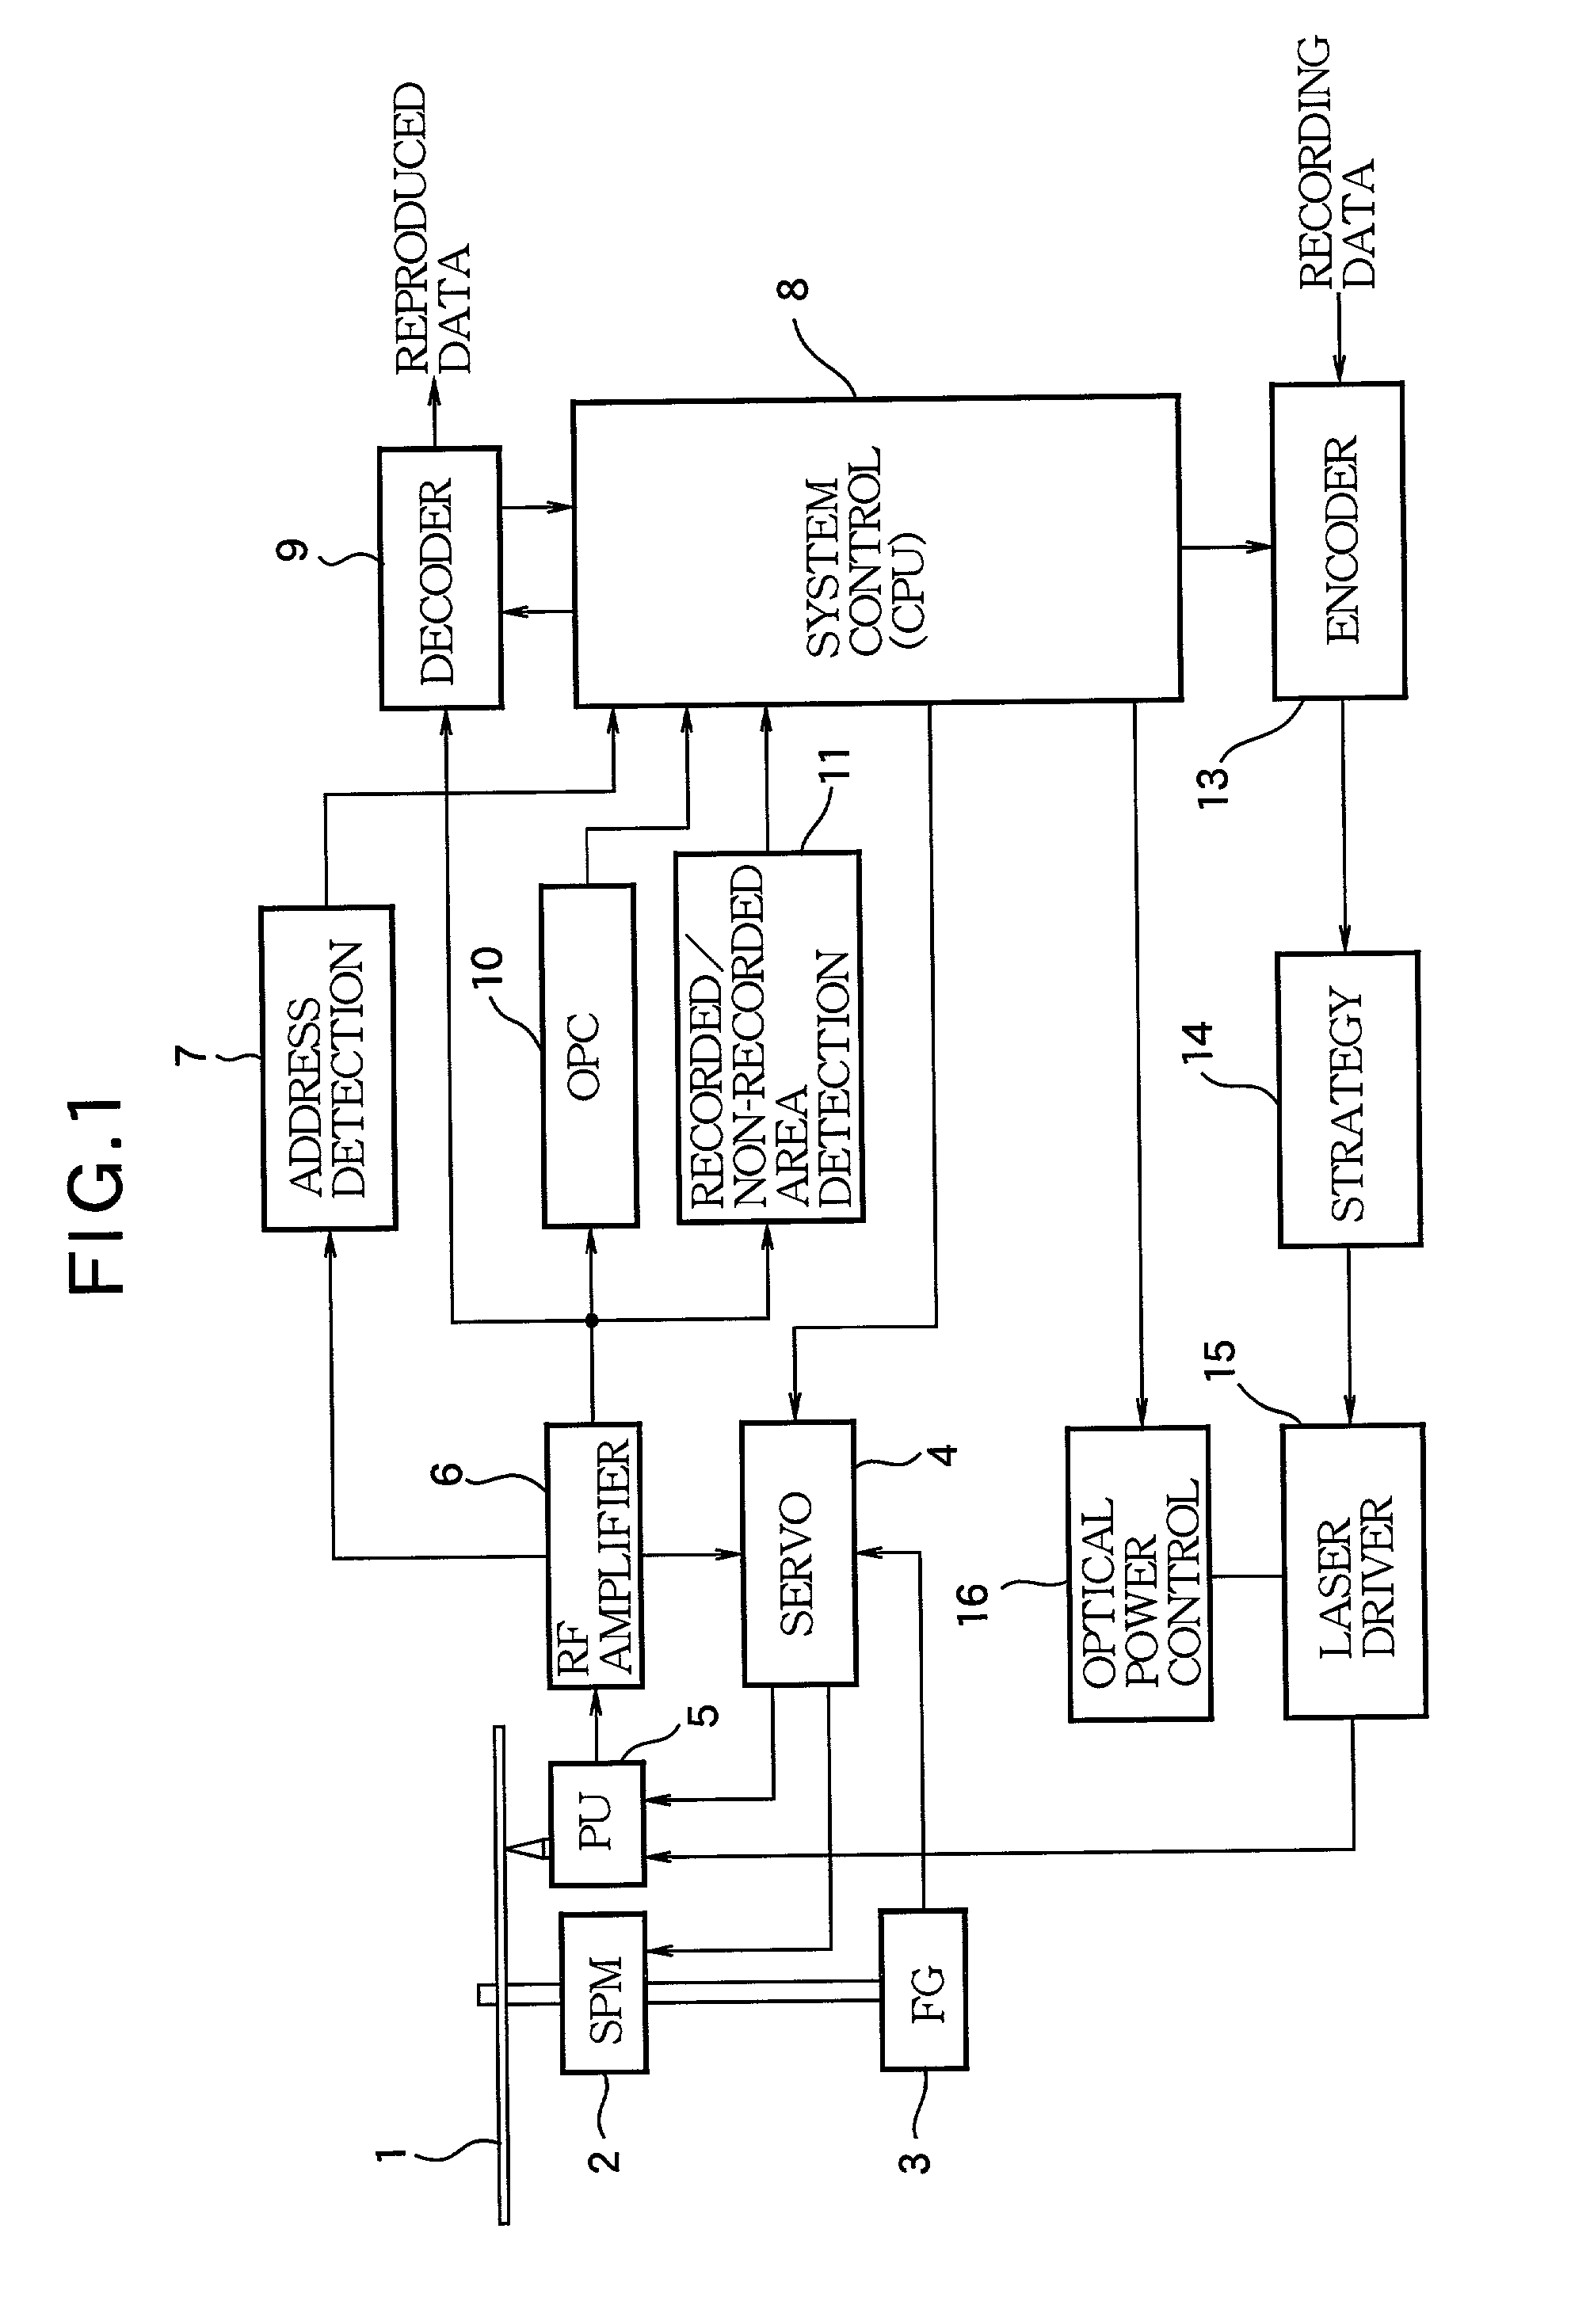 Optical disk recorder optimizing laser power for initial writing and overwriting